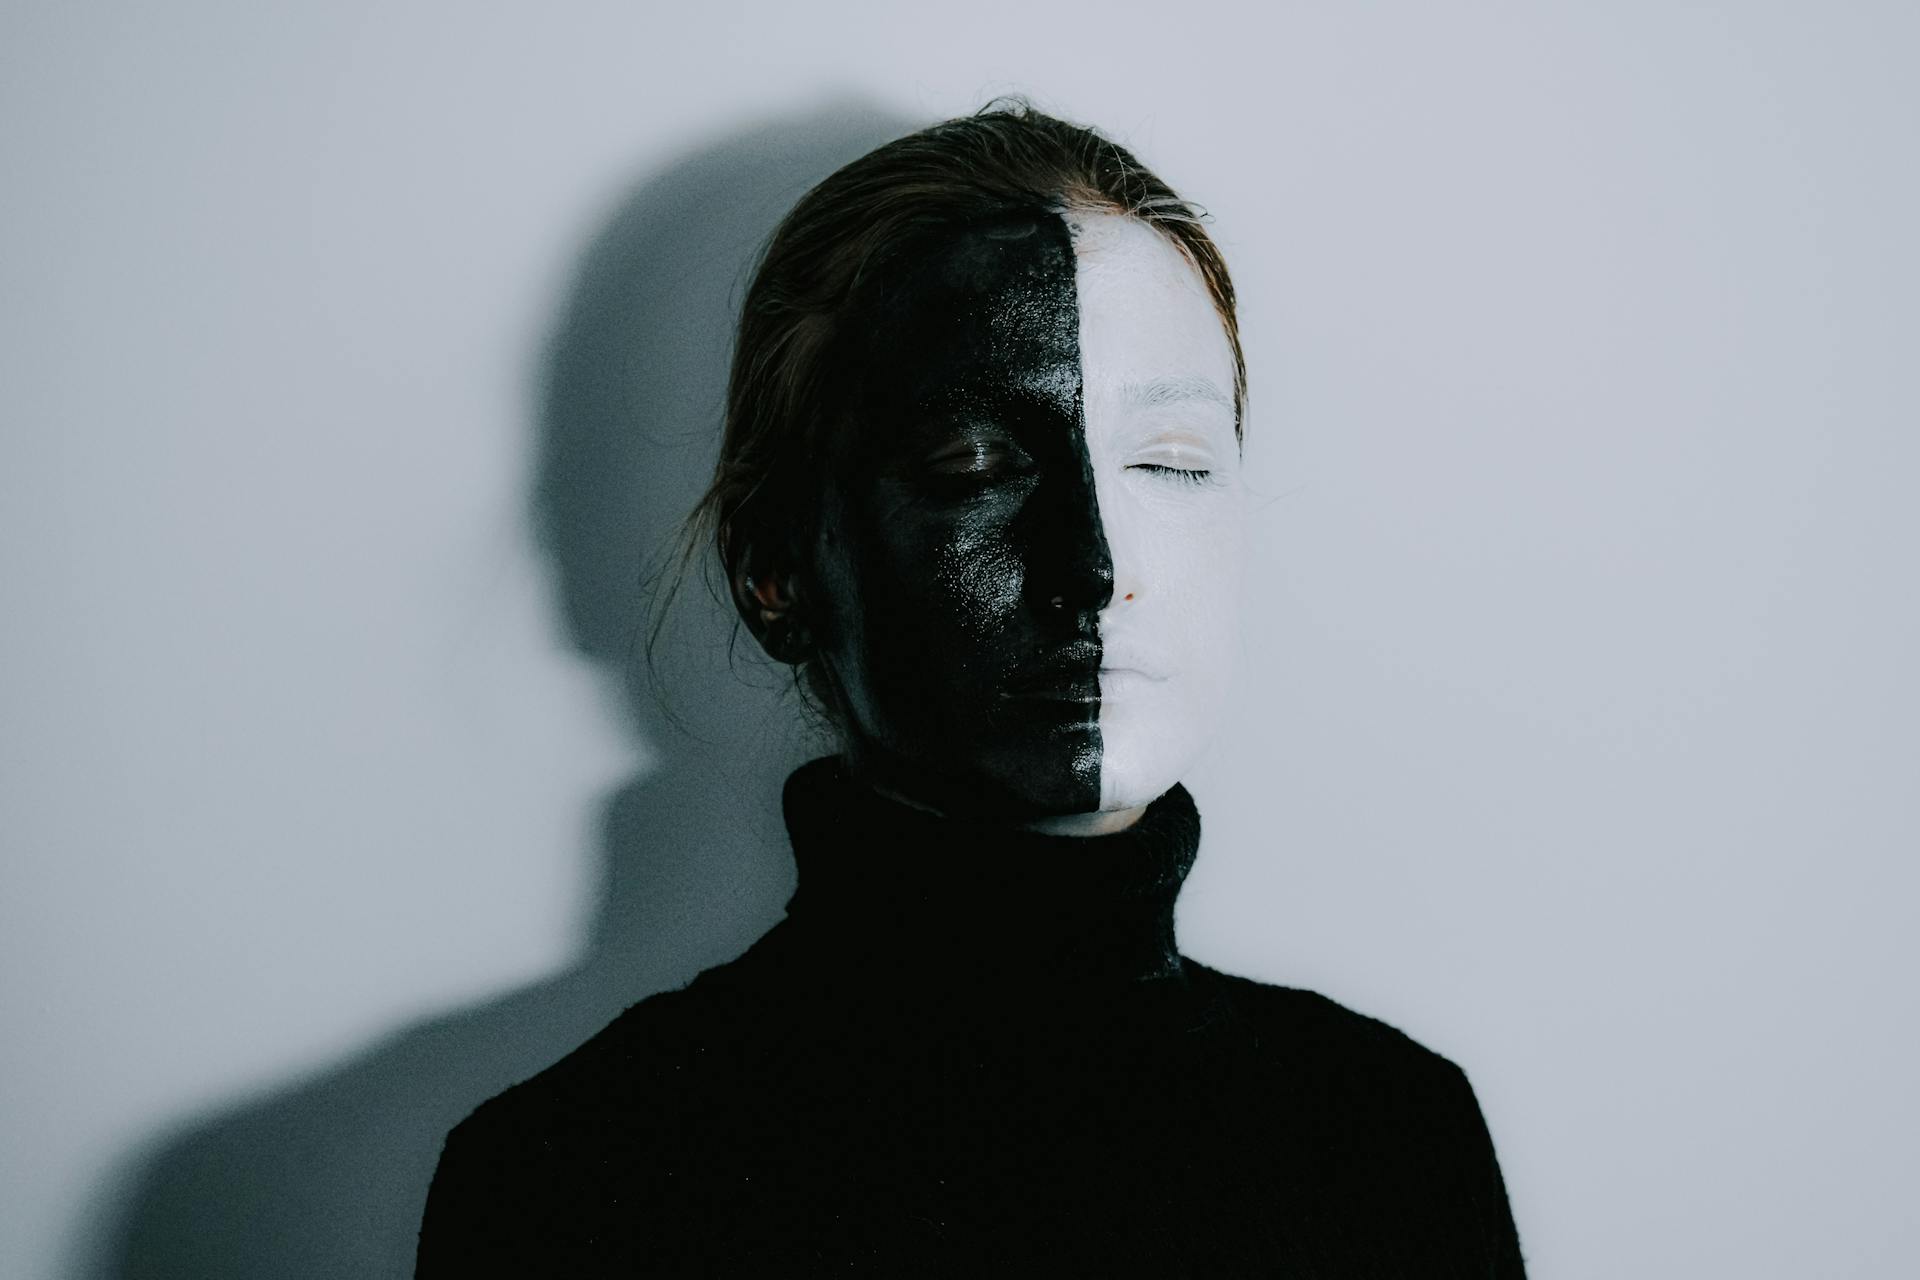 Mysterious female with face painted half in white and half in black colors standing with closed eyes against light background